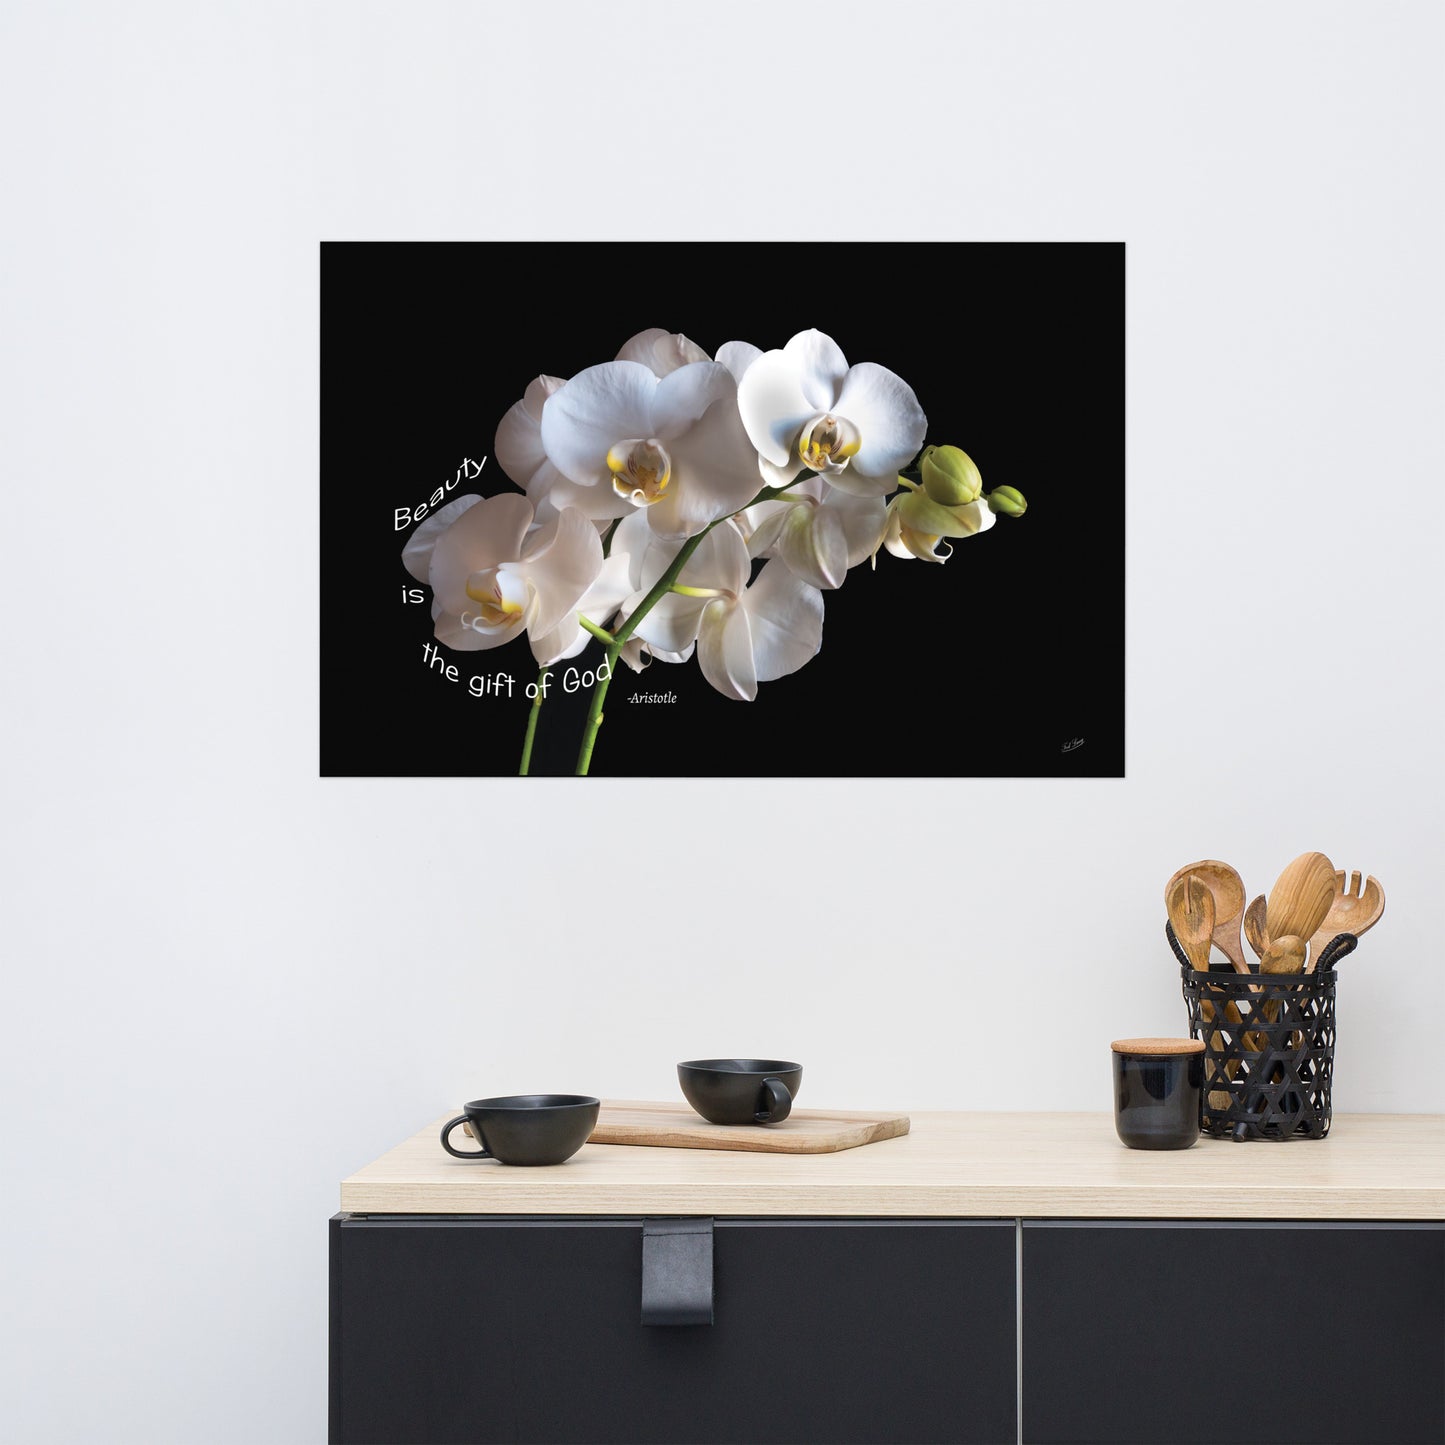 White Orchid Print Aristotle Quote - "Beauty is the gift of God" - Inspirational spiritual Wall Art. Dramatic Black Background Floral art.